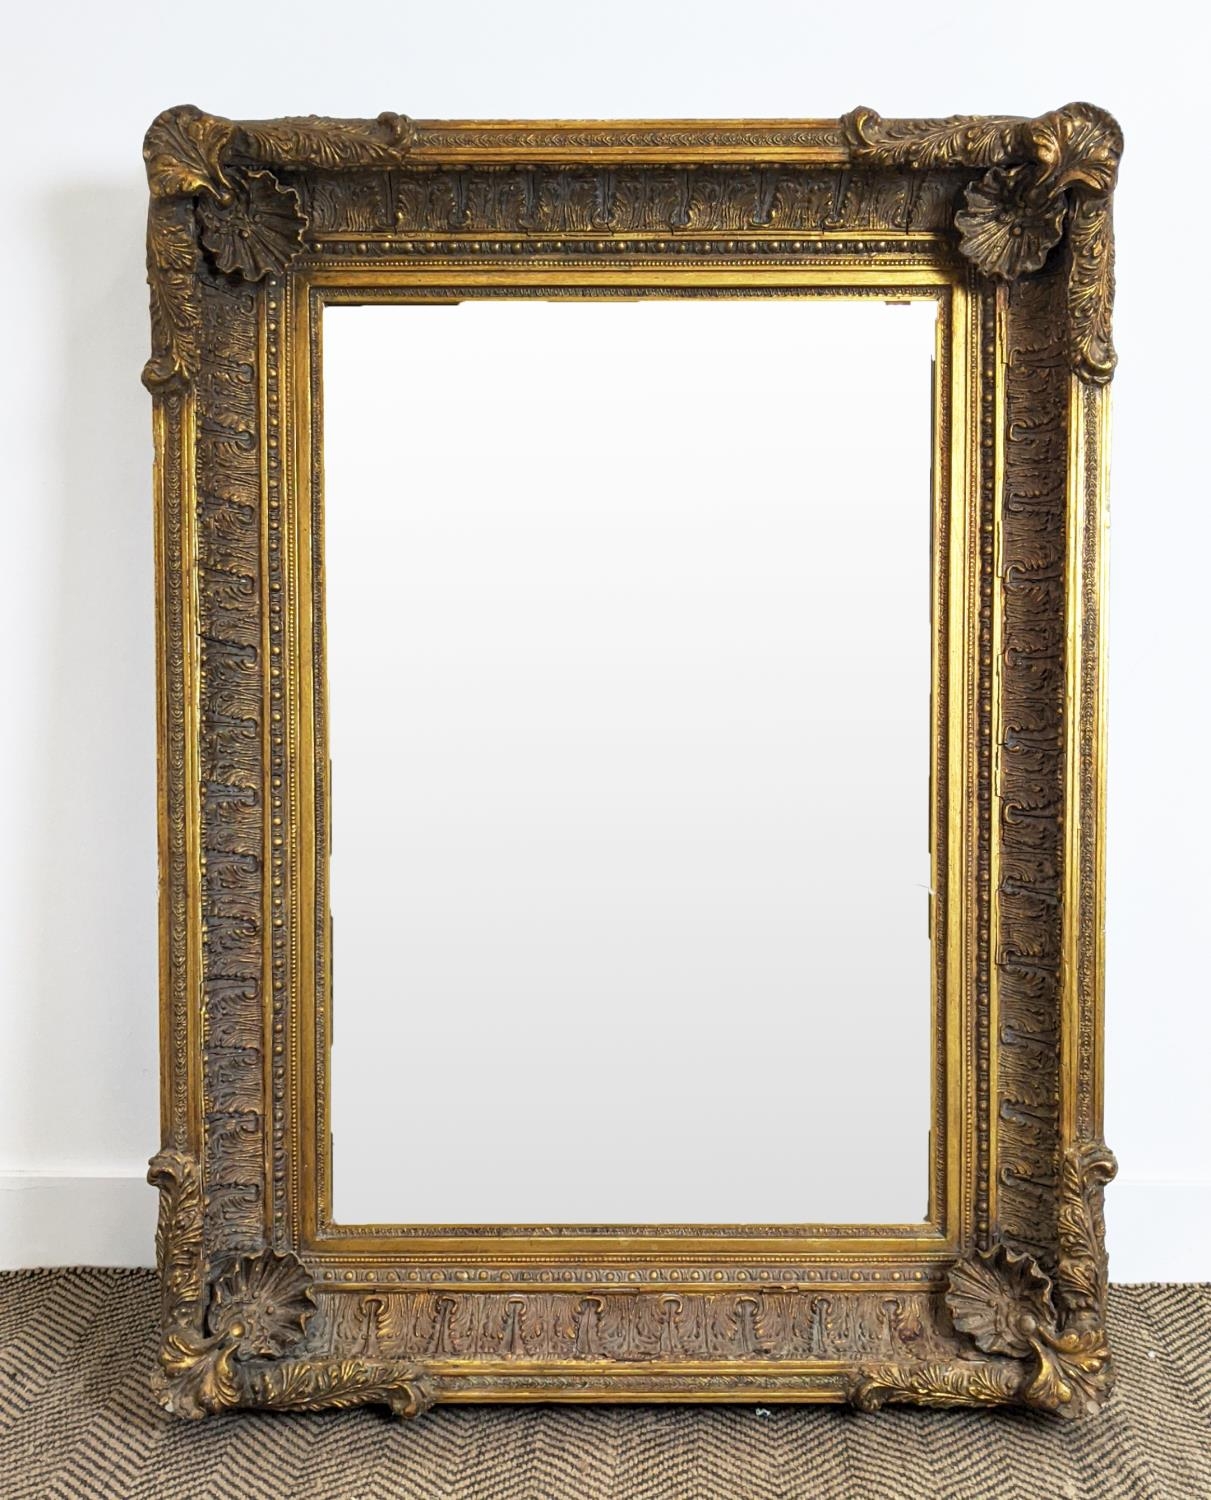 WALL MIRROR, 19th century style gilt framed with shell and leaf decoration, 121cm x 88cm. - Image 4 of 16